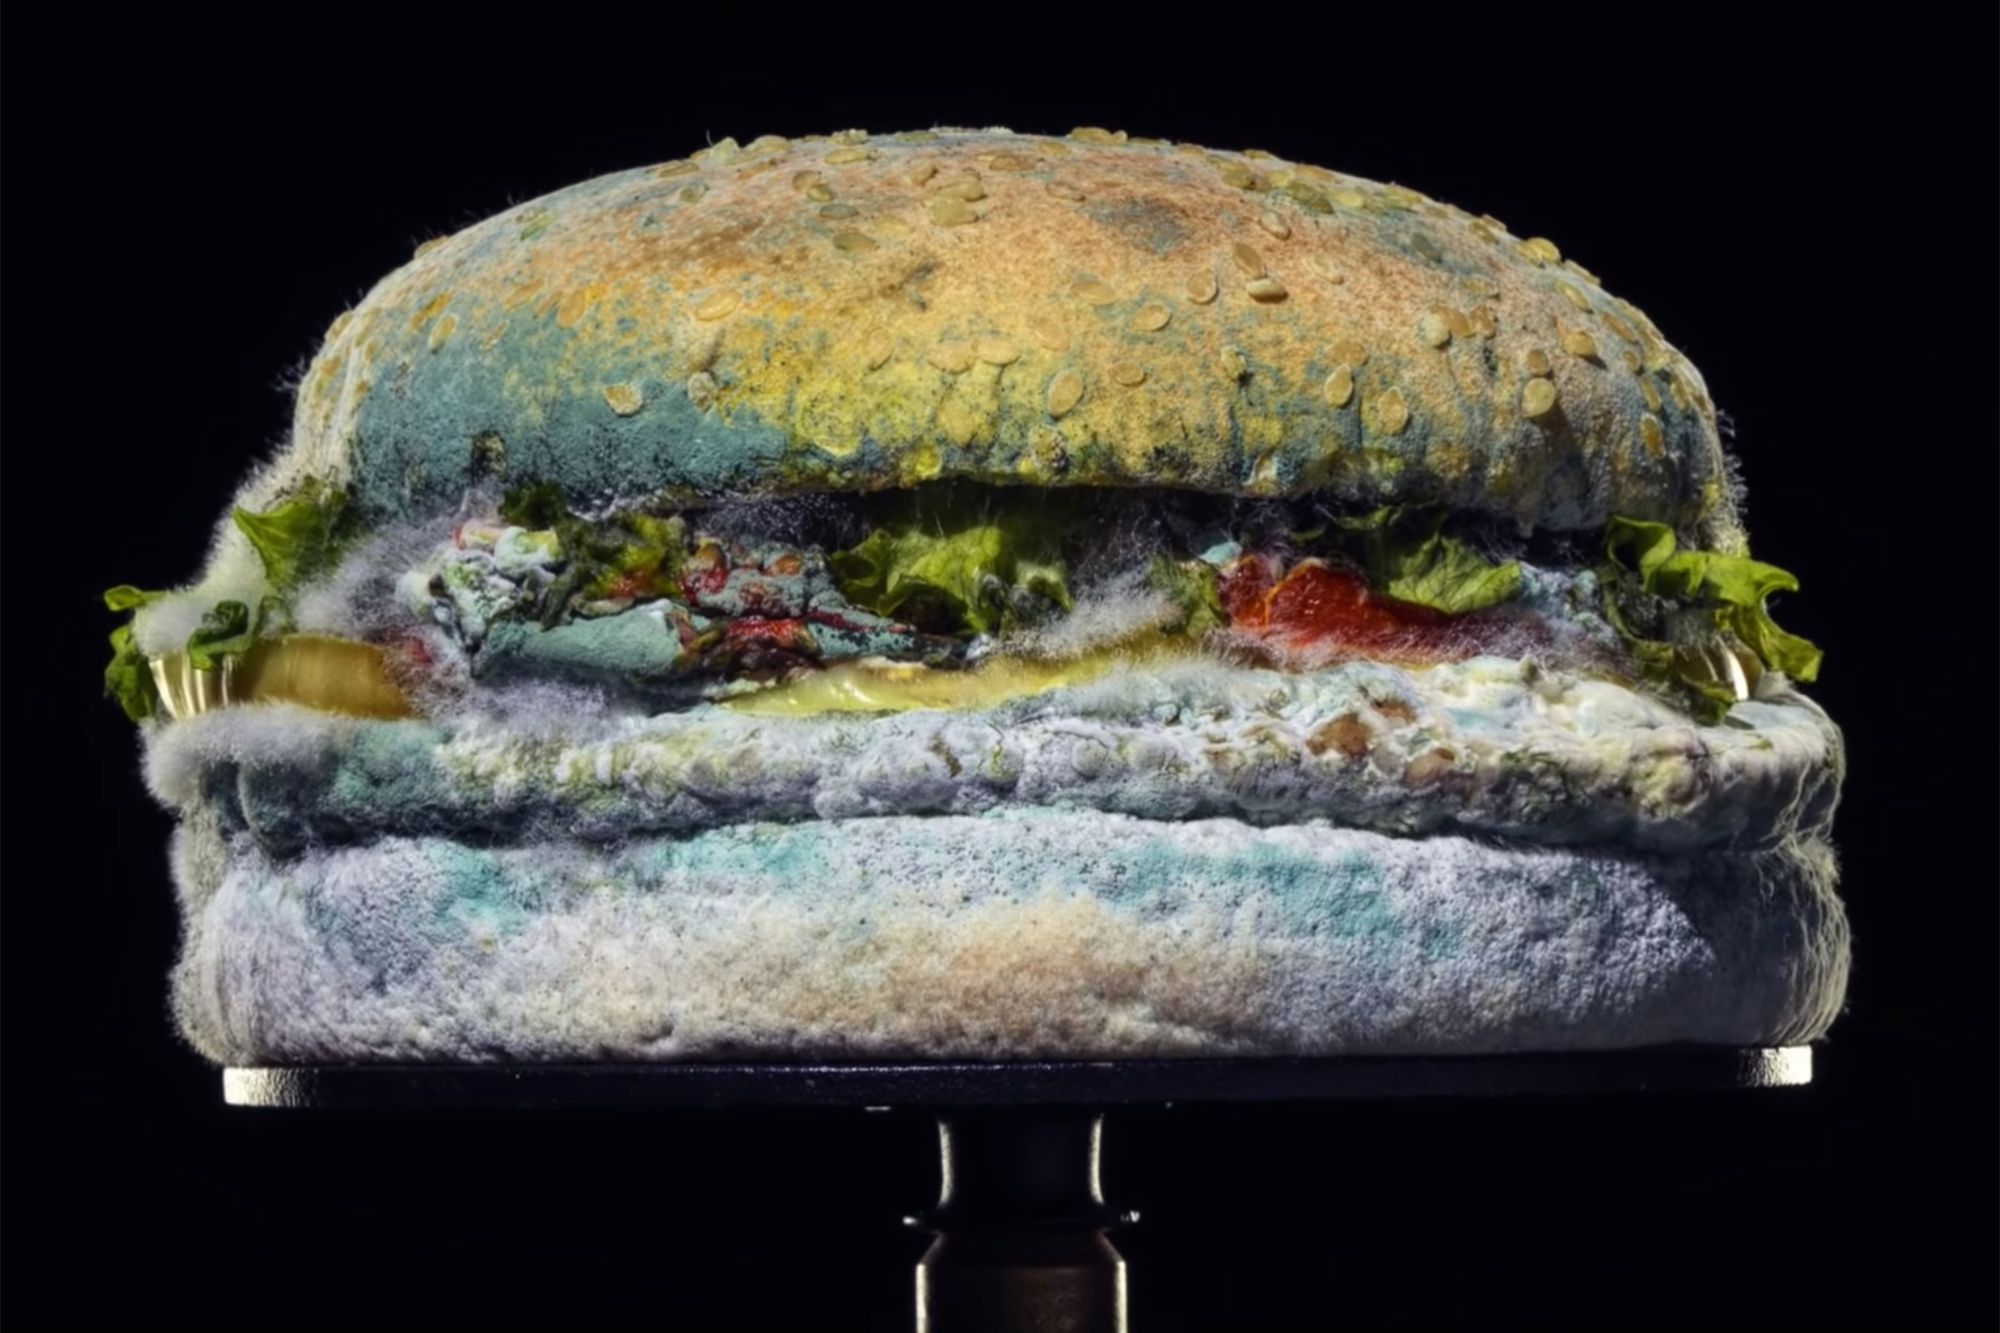 Take a bite out of this new Burger King ad